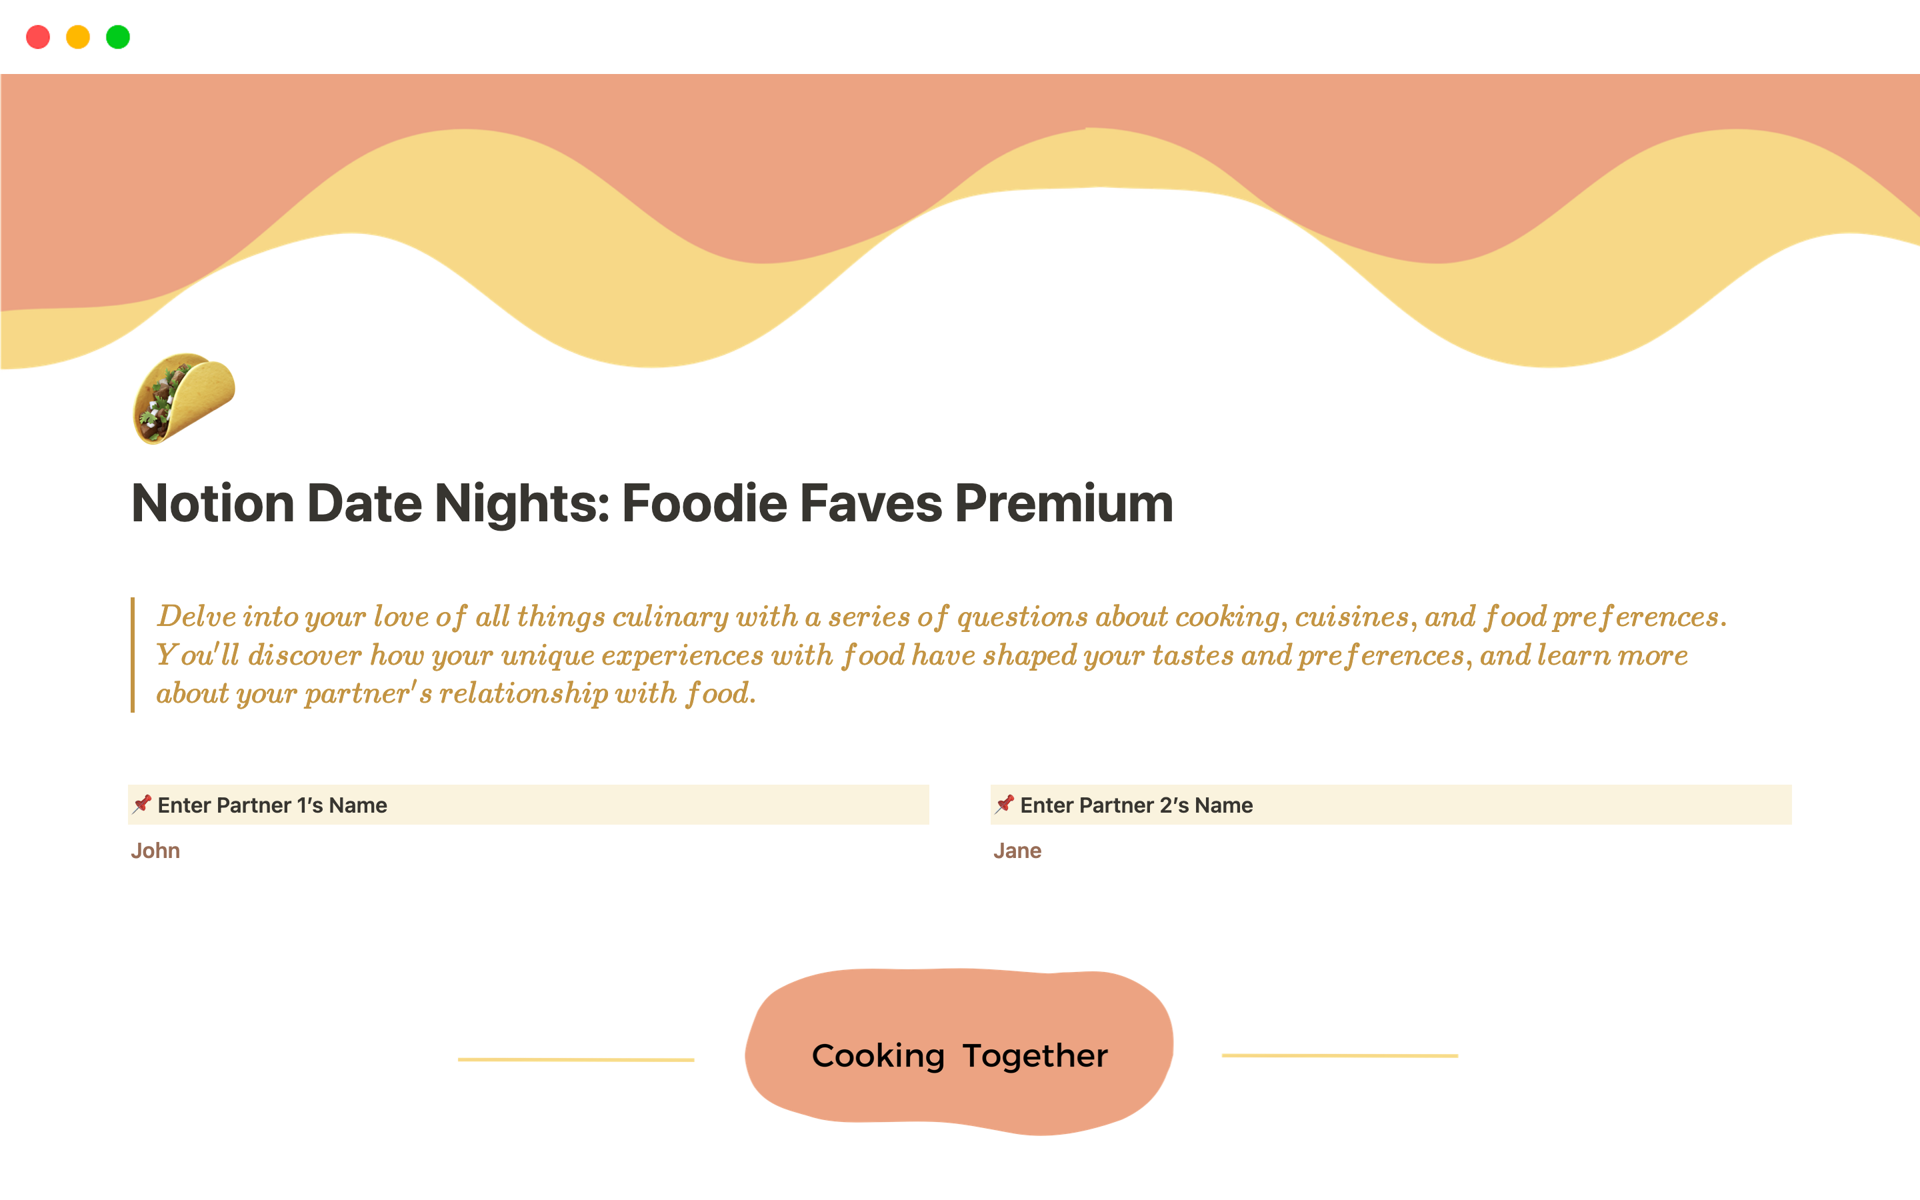 The 'Foodie Favorites' is a creative and engaging Notion template from MD Meets Techie, designed for couples to document and celebrate their shared culinary adventures and preferences.